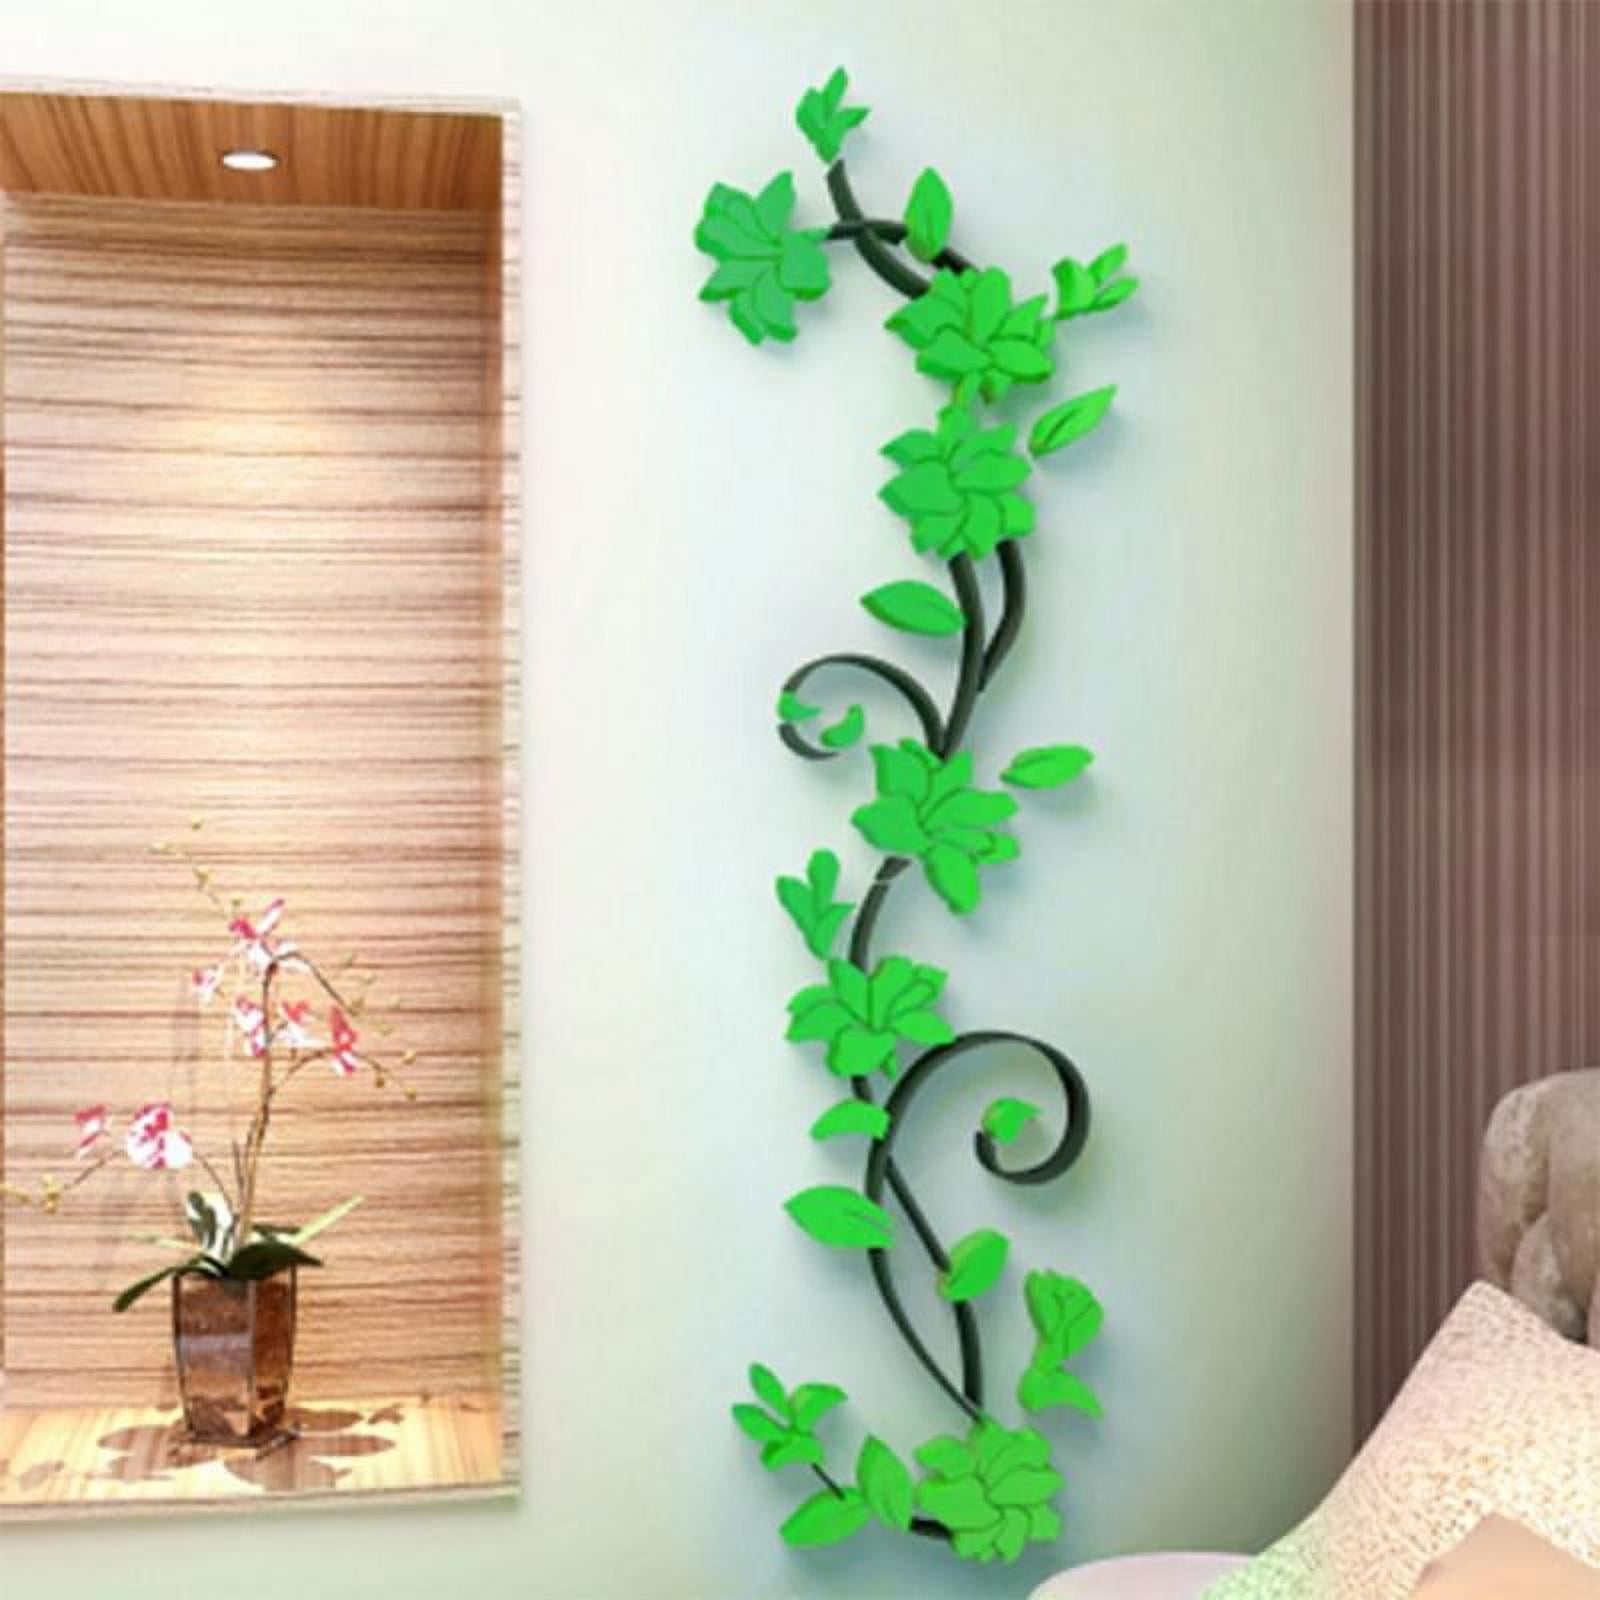 3D Lifelike Rose Flowers Wall Stickers DIY Removable Home Bedroom Decor Decals